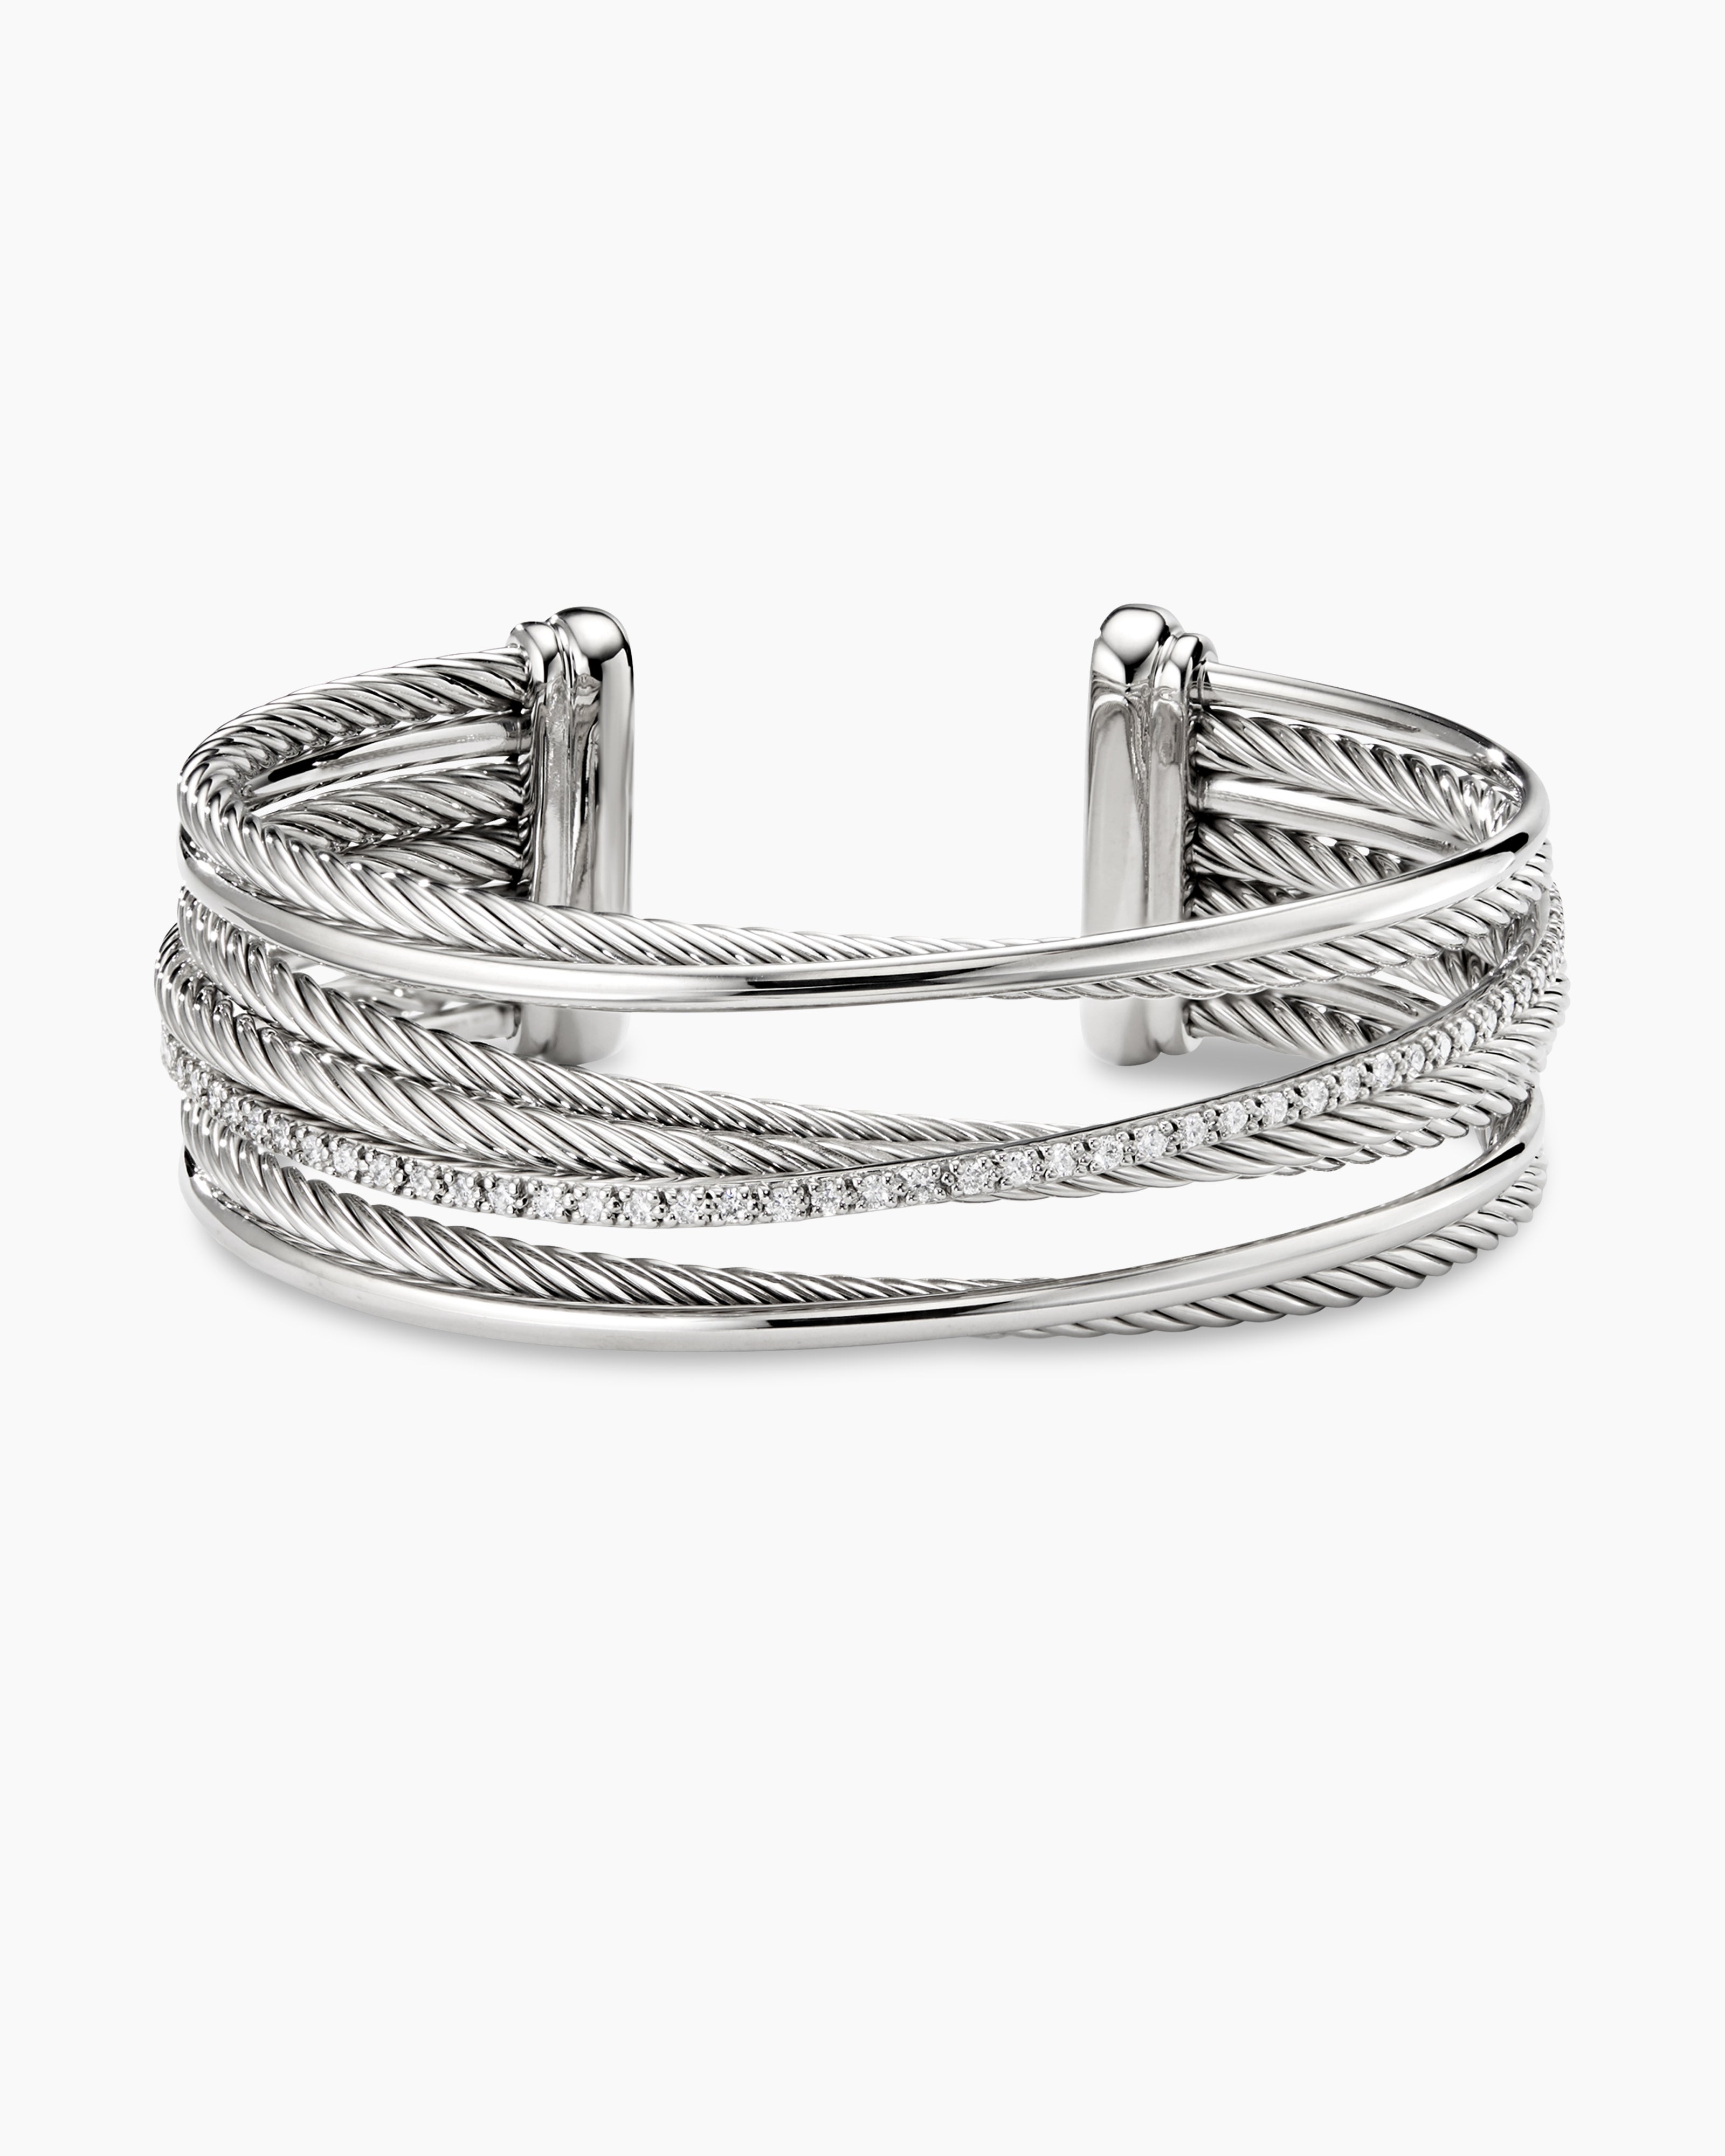 David Yurman Crossover Bracelet with Gold and Diamonds | Bloomingdale's